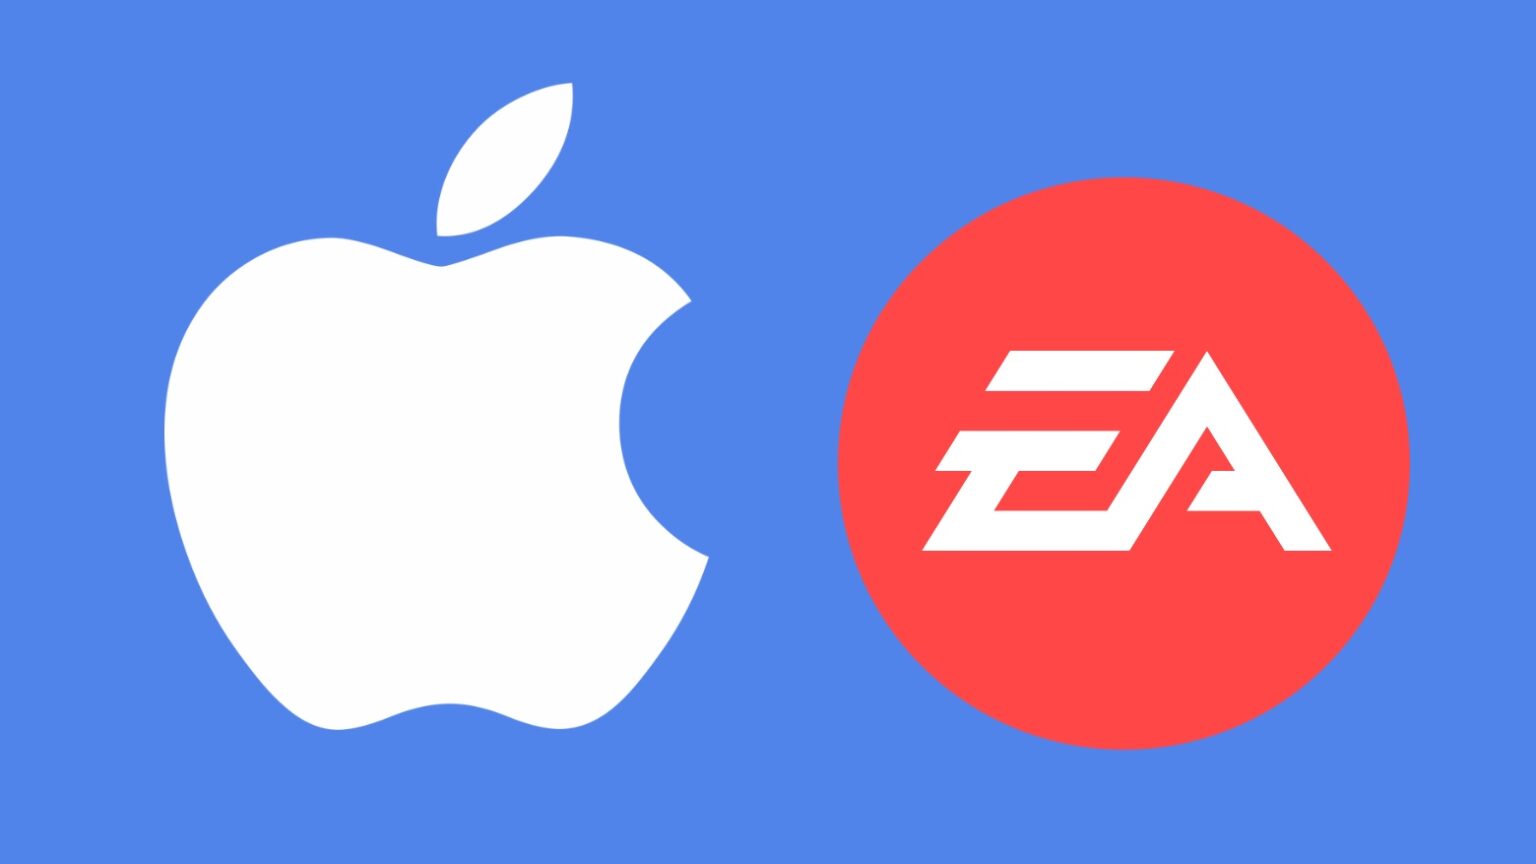 Apple considered acquiring gaming giant Electronic Arts